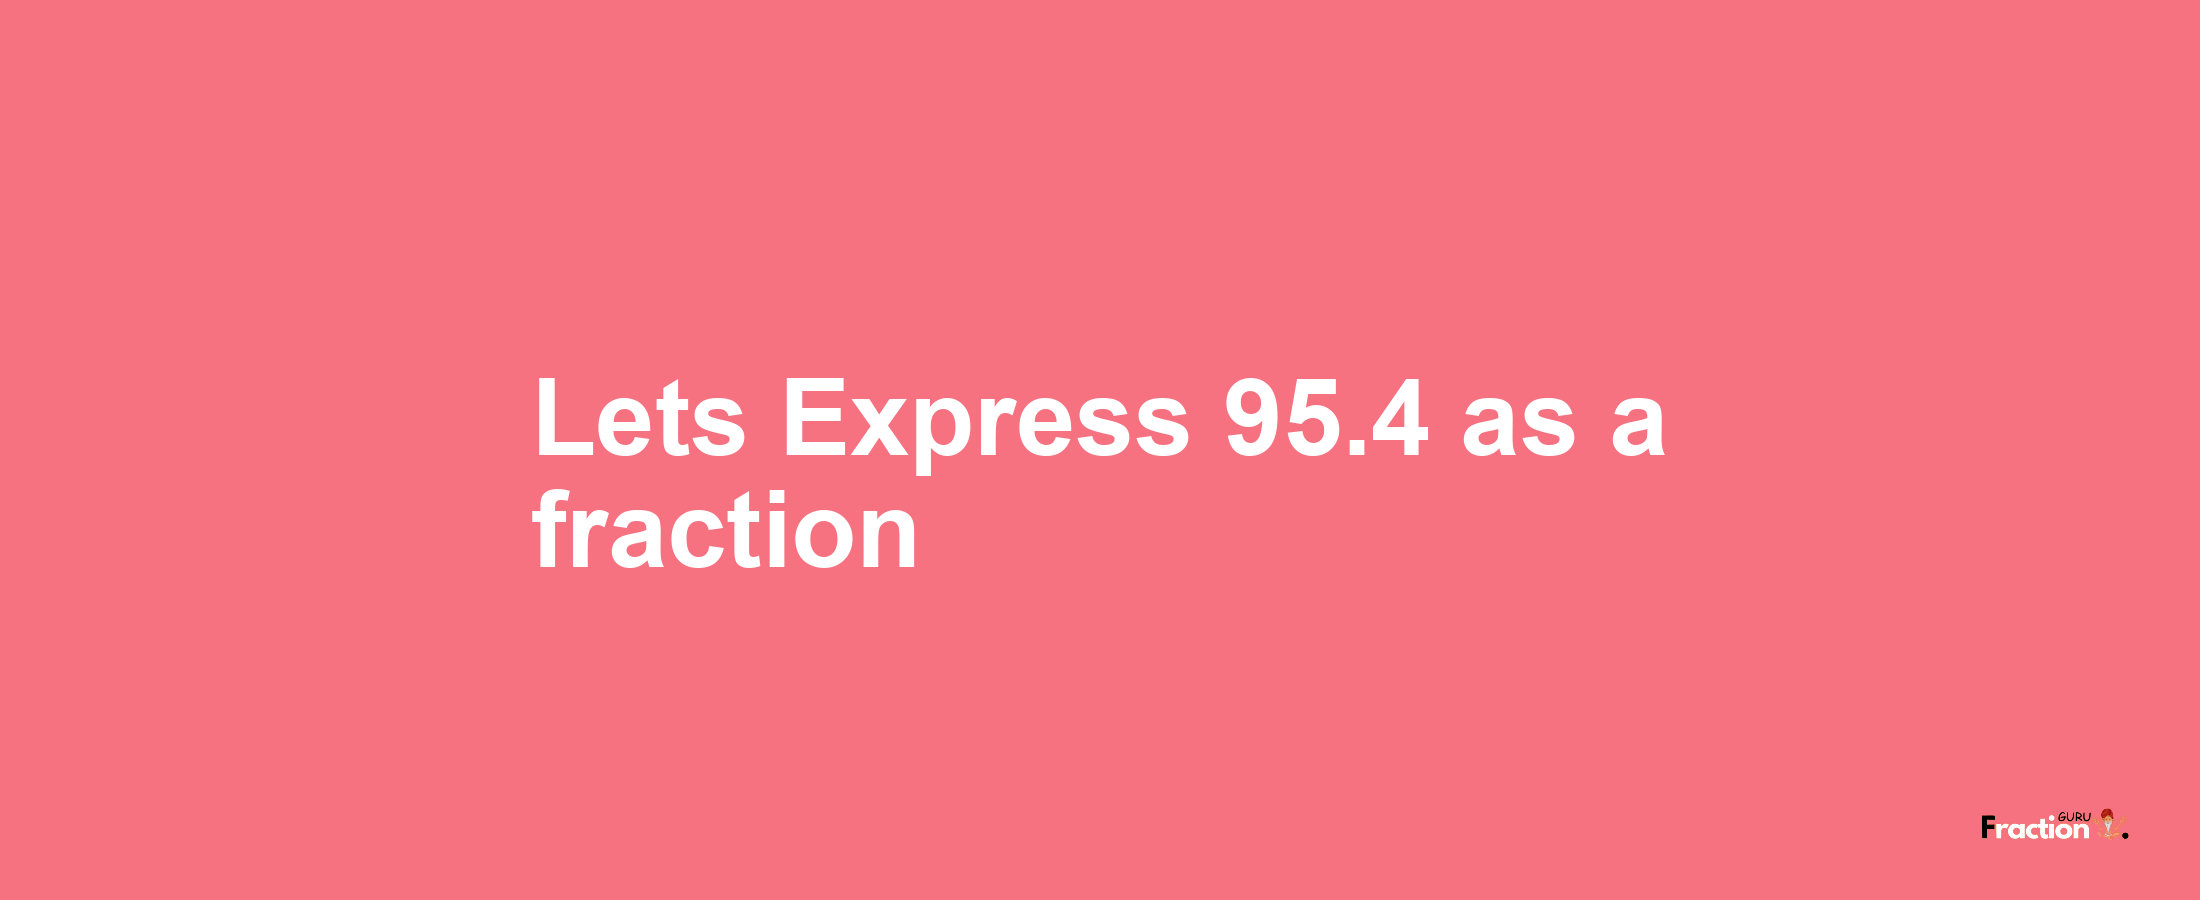 Lets Express 95.4 as afraction